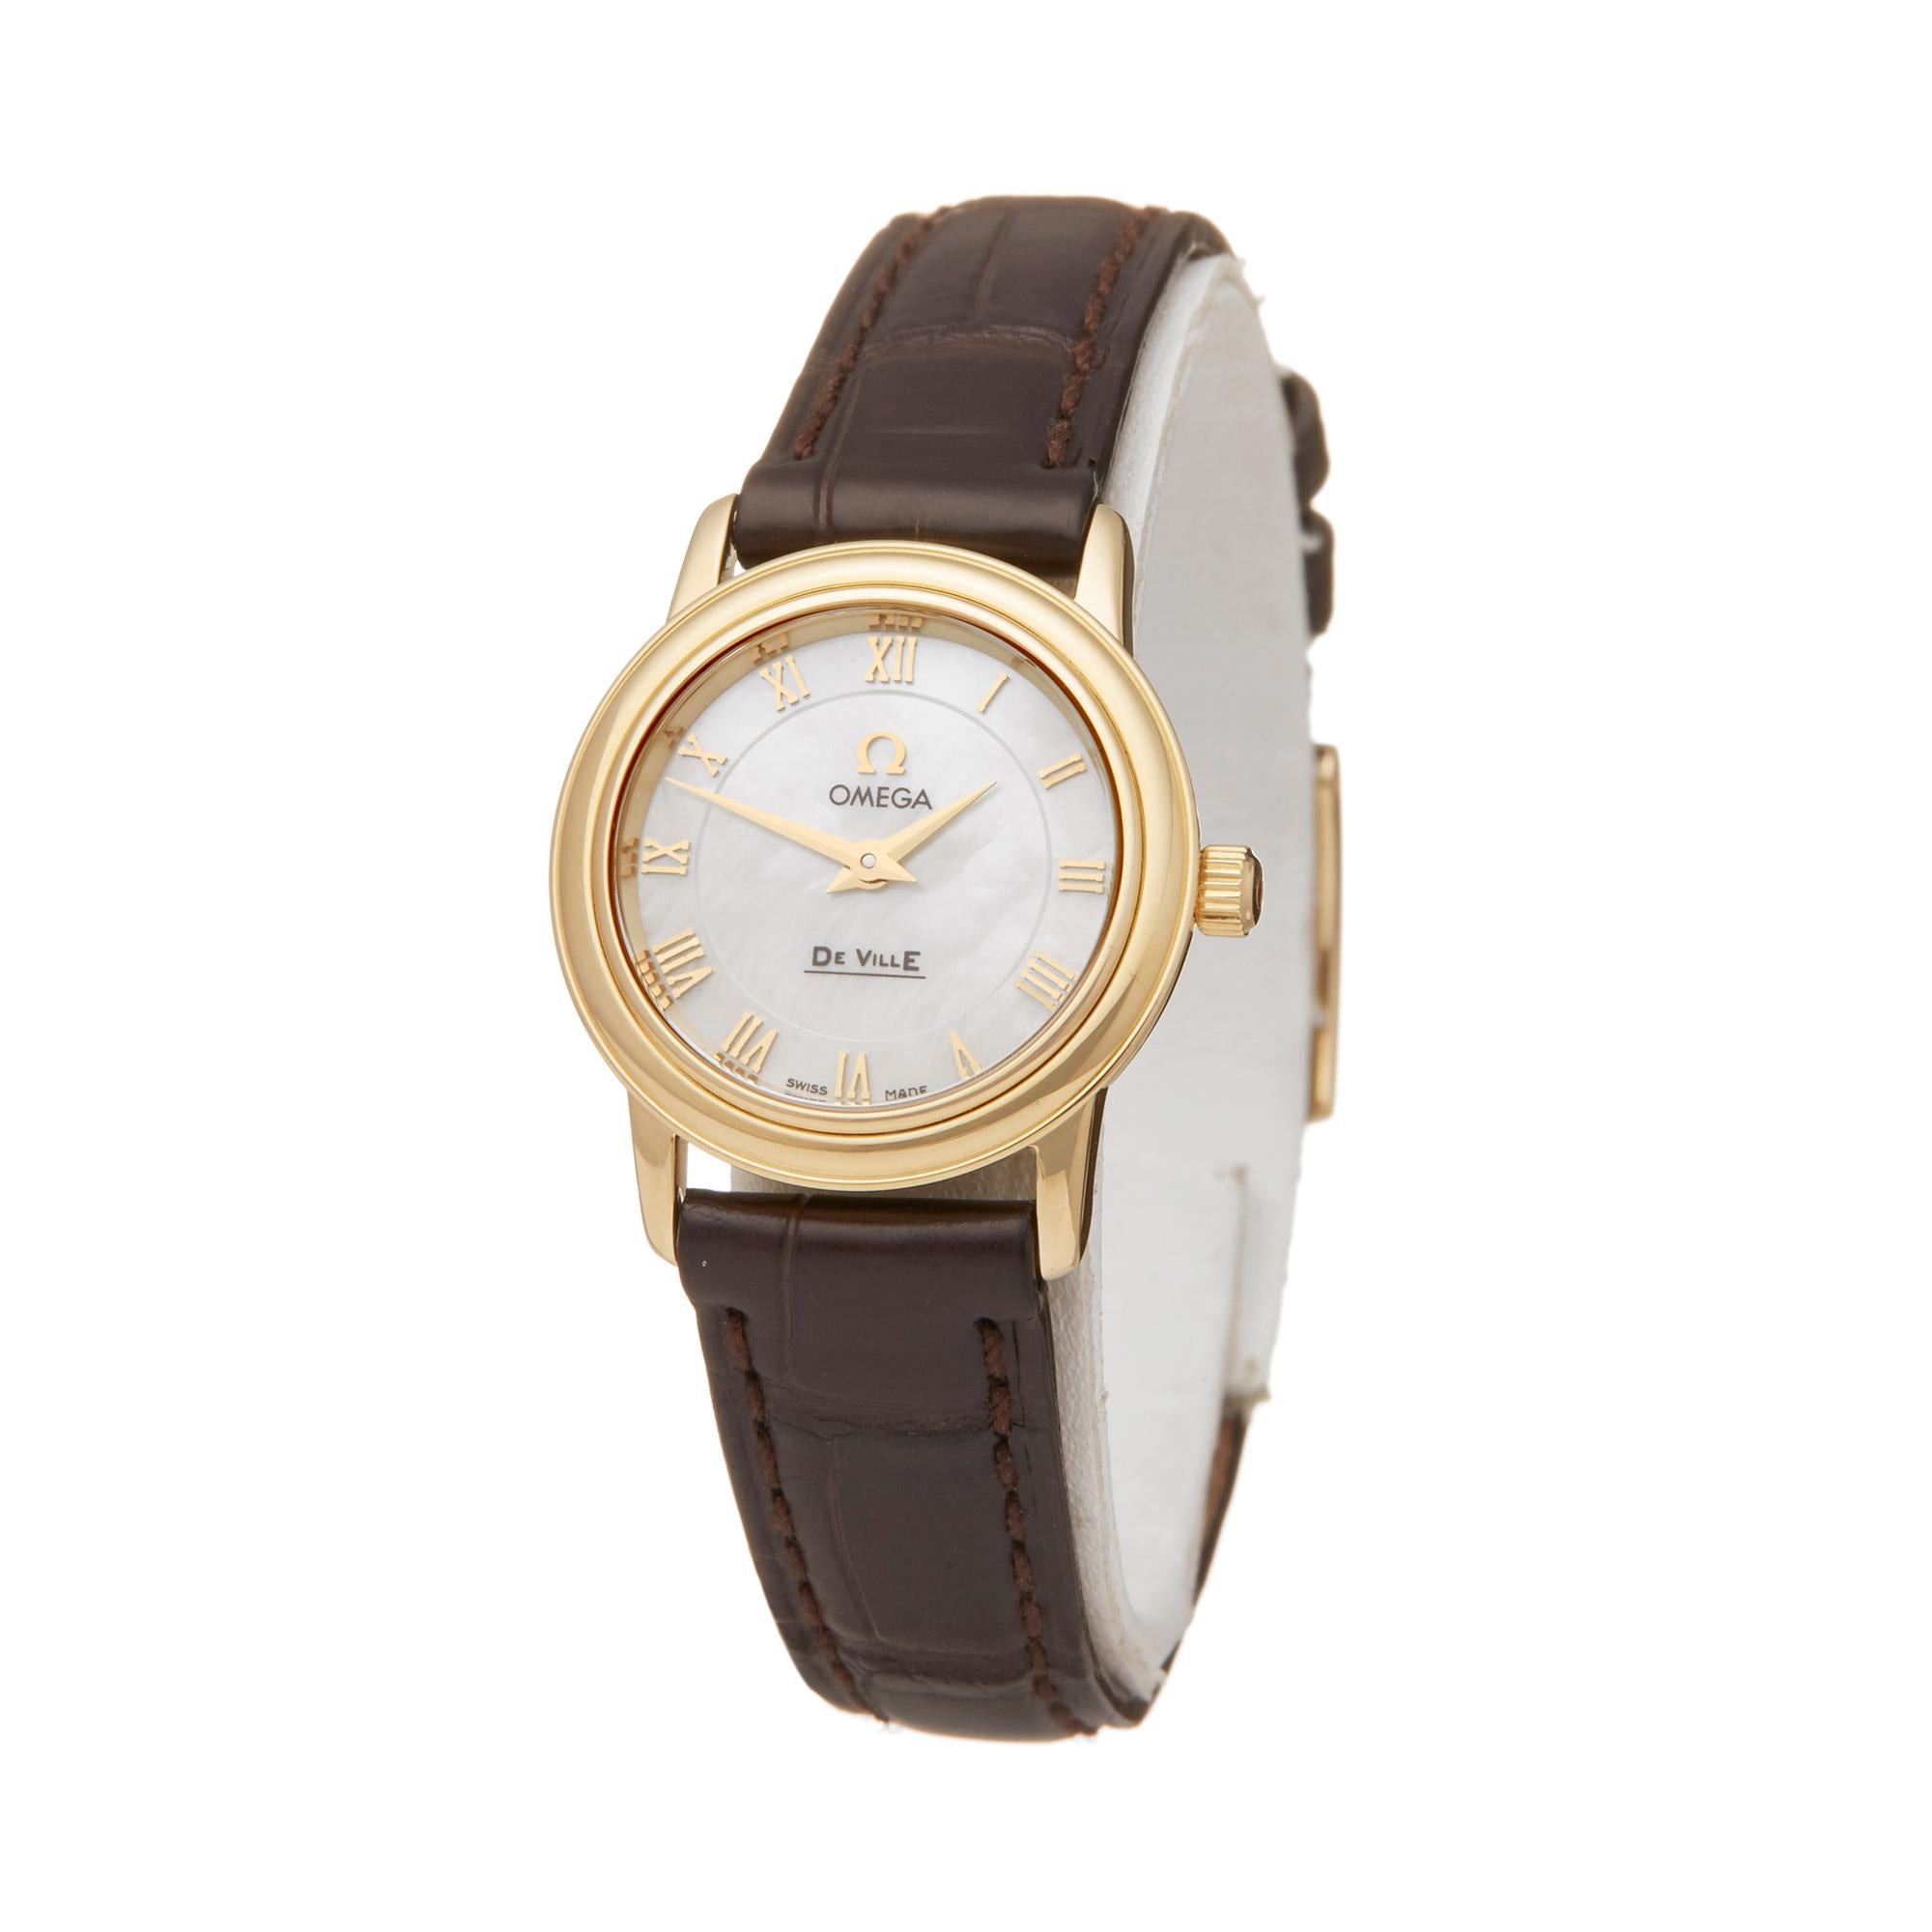 Ref: W5990
Manufacturer: Omega
Model: De Ville
Model Ref: 4670.71.02
Age: Circa 2010's
Gender: Ladies
Complete With: Box Only
Dial: Mother of Pearl Roman
Glass: Sapphire Crystal
Movement: Quartz
Water Resistance: To Manufacturers